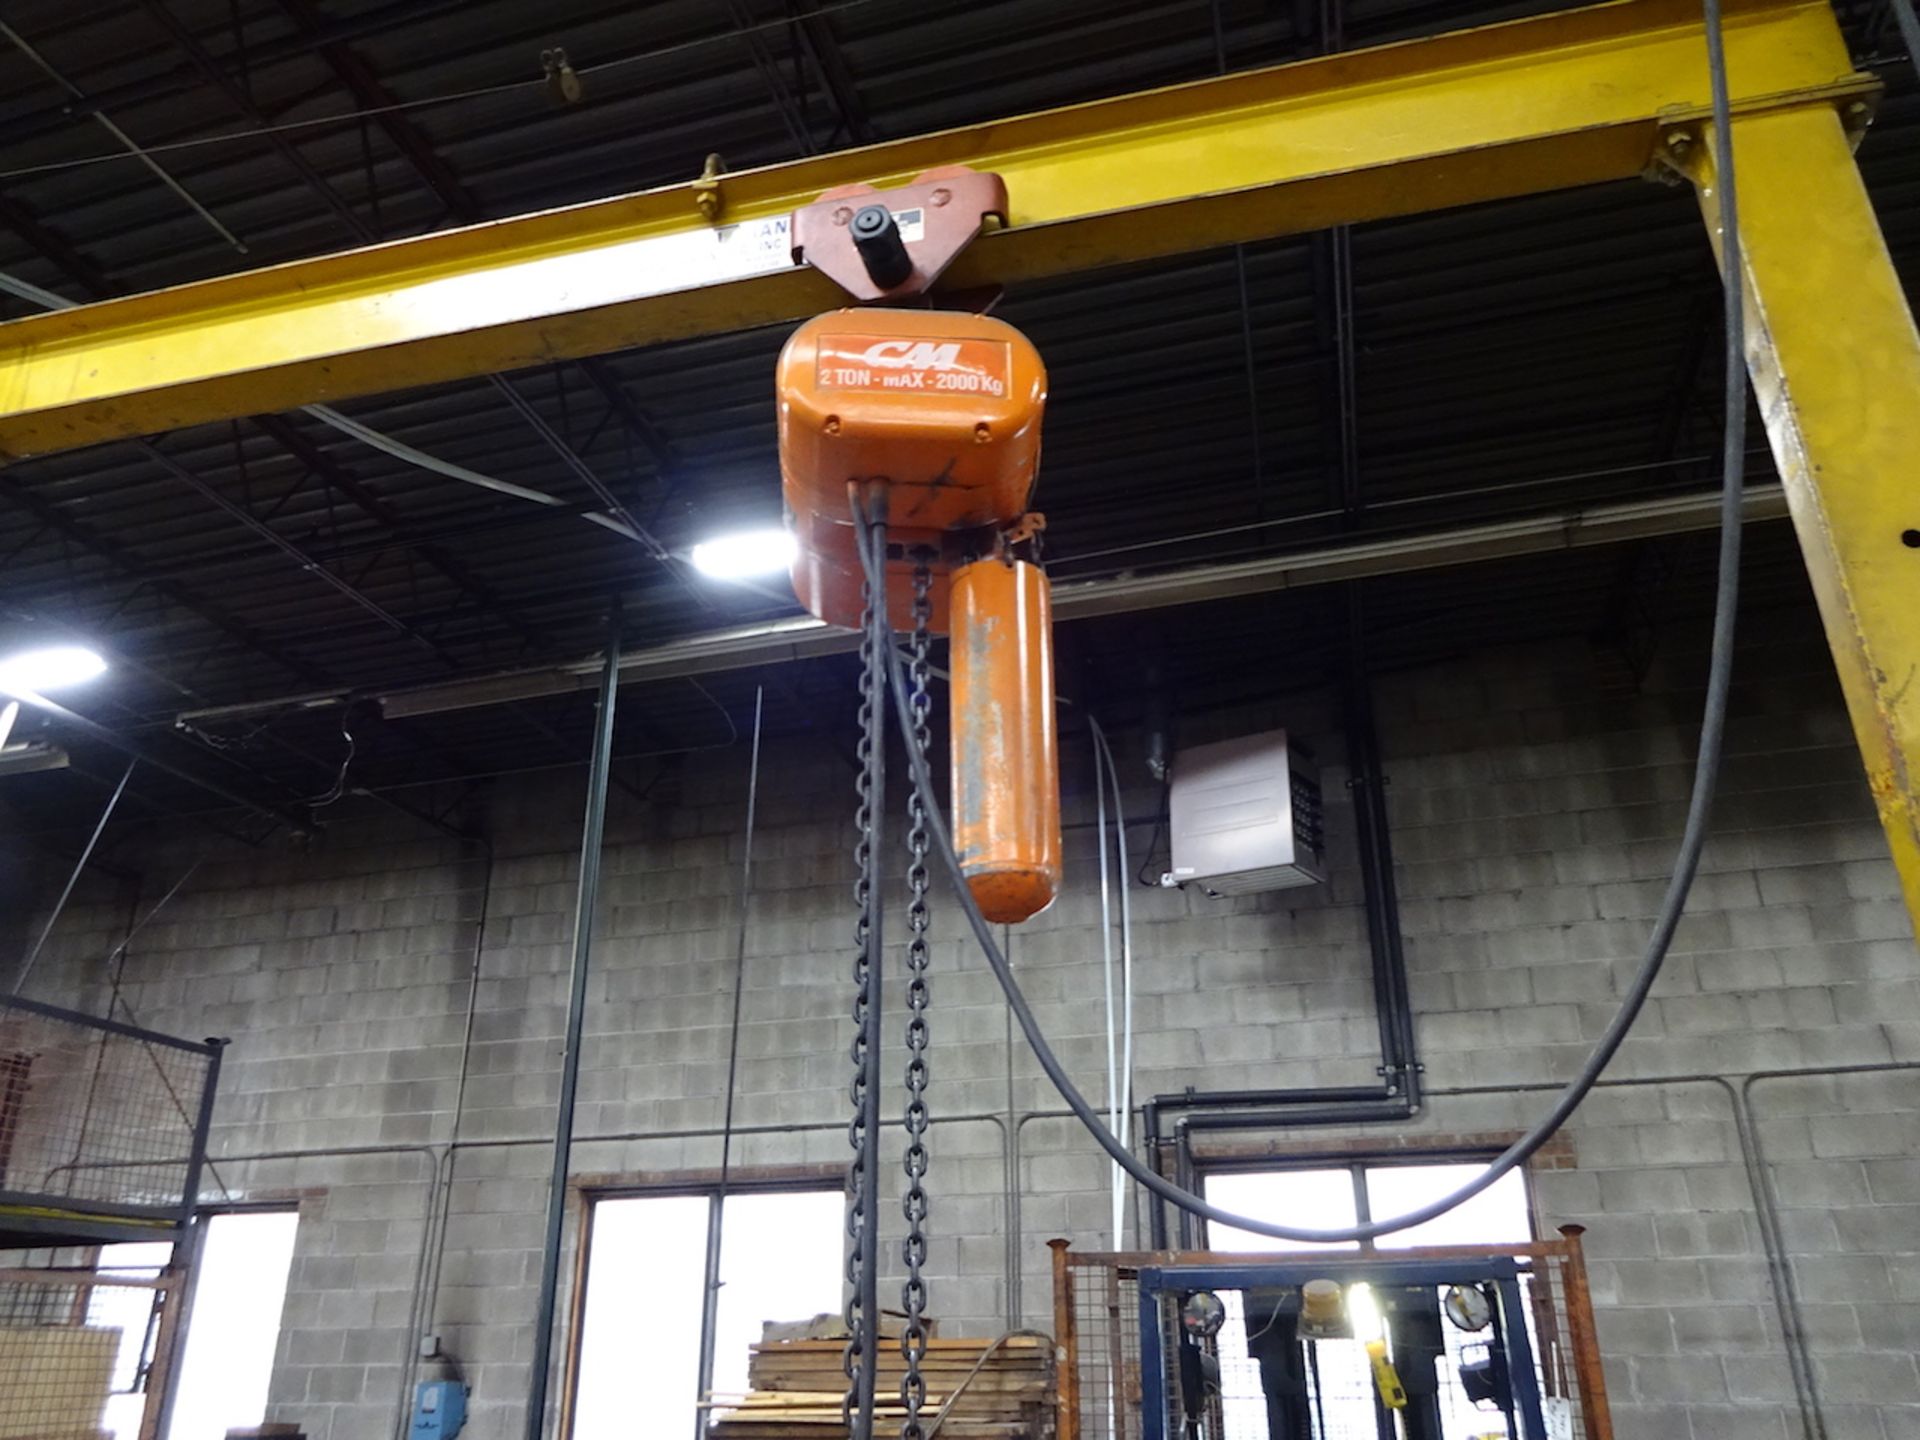 Industrial Crane 2 Ton Portable Adjustable Gantry, with CM Lodestar 2 Ton Electric Hoist, Approx. - Image 2 of 3